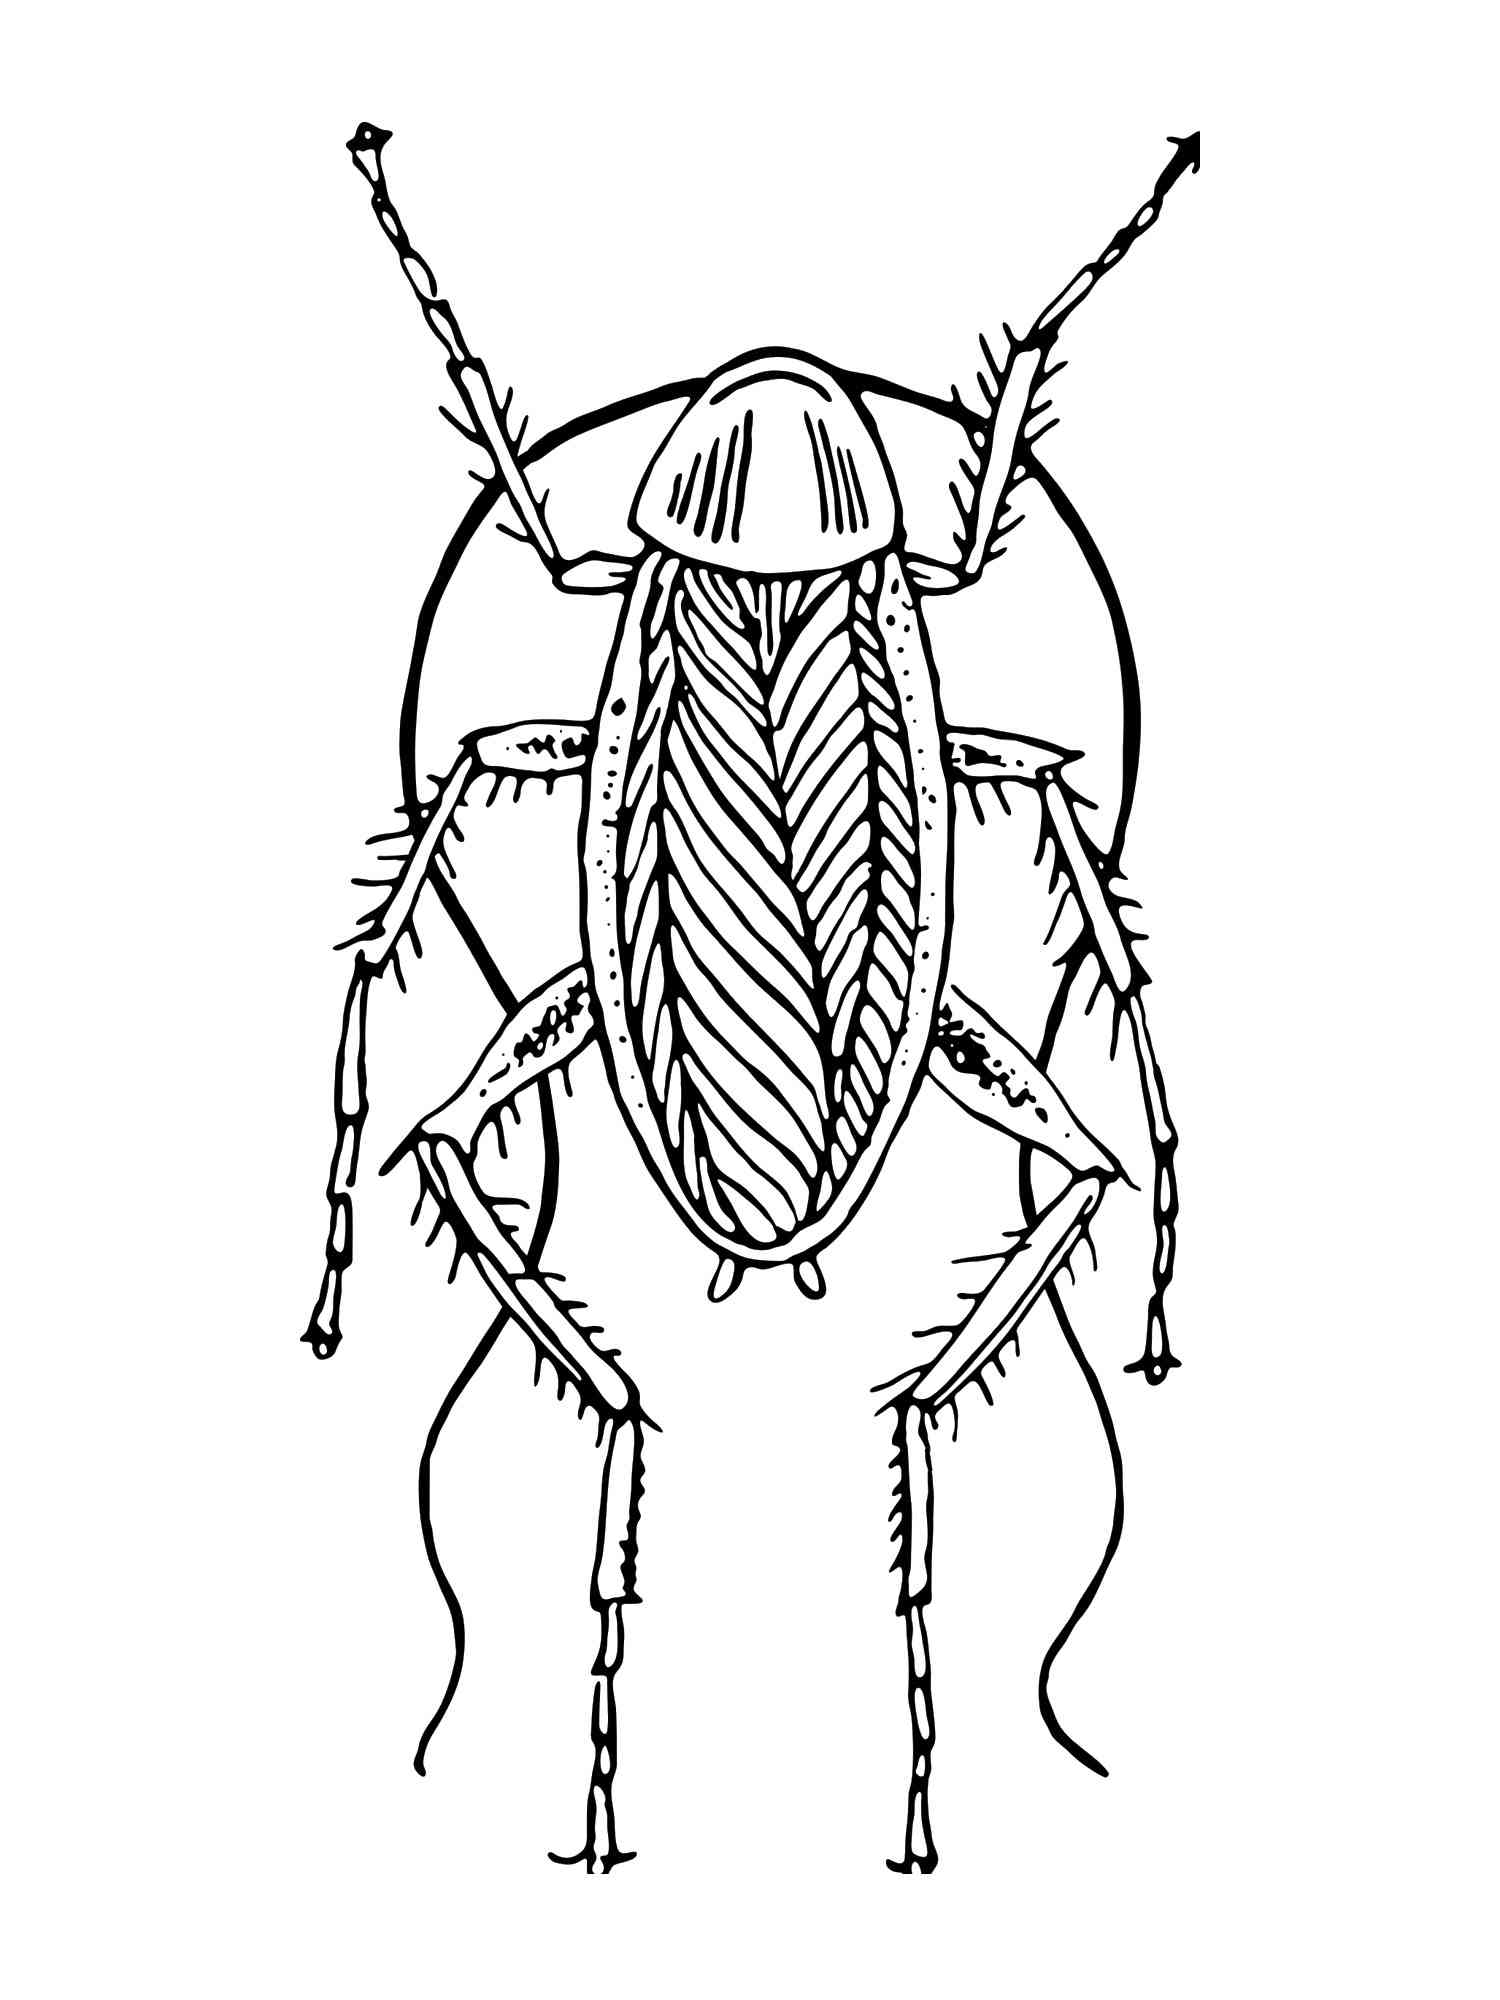 Common Cockroach coloring page